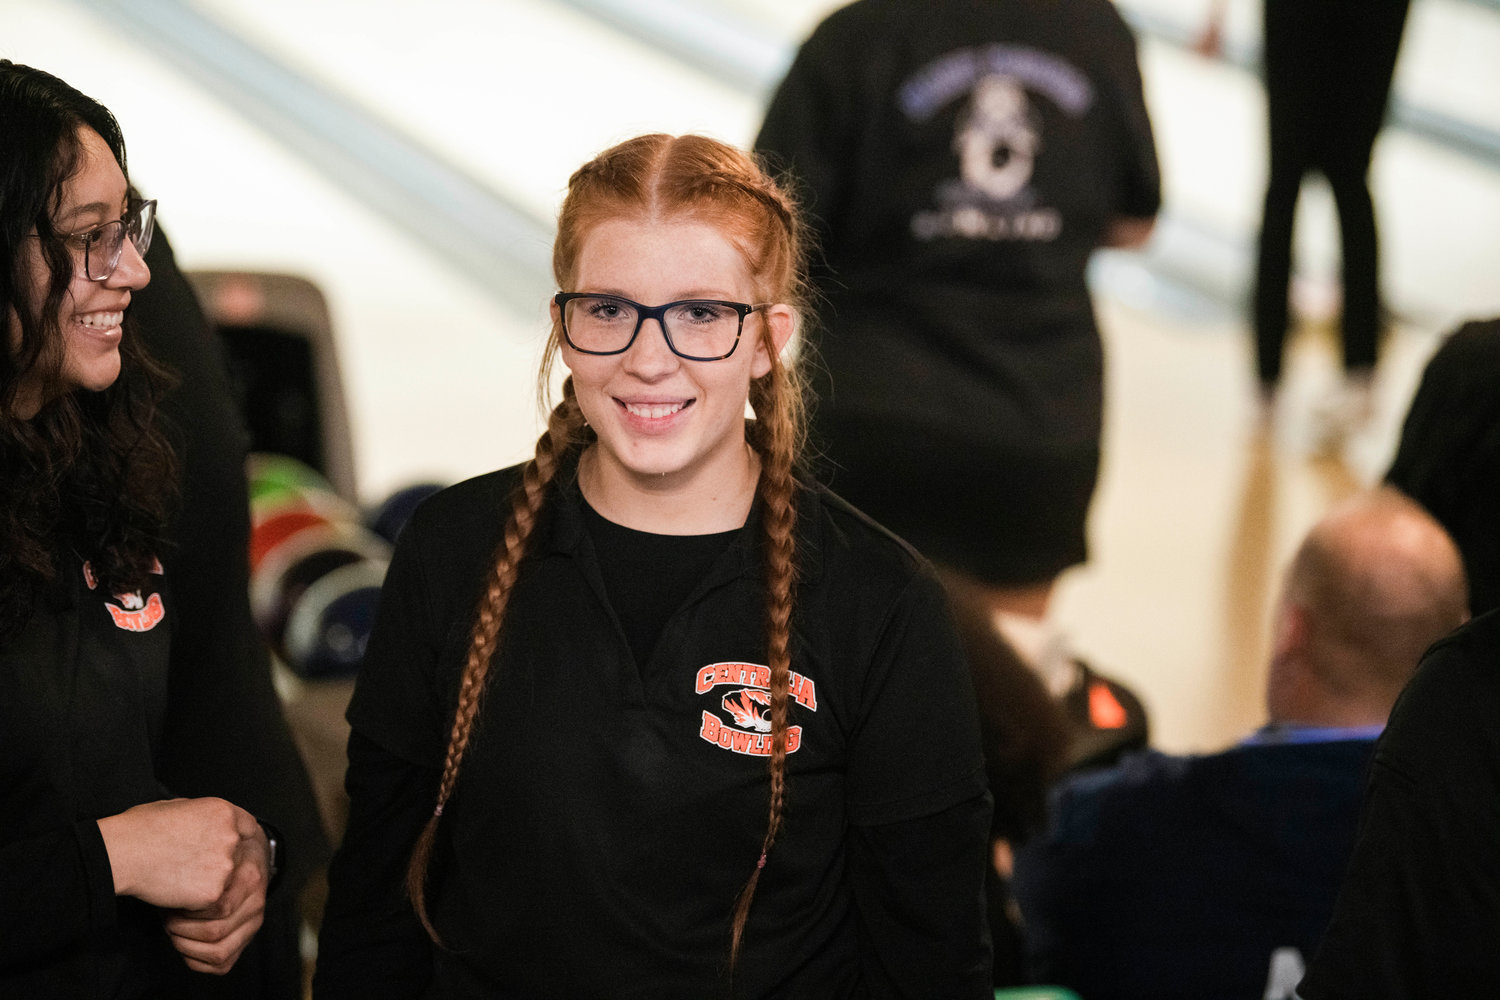 Centralia’s Bailee Spriggs smiles for a photo while bowling at Westside Lanes in Olympia.